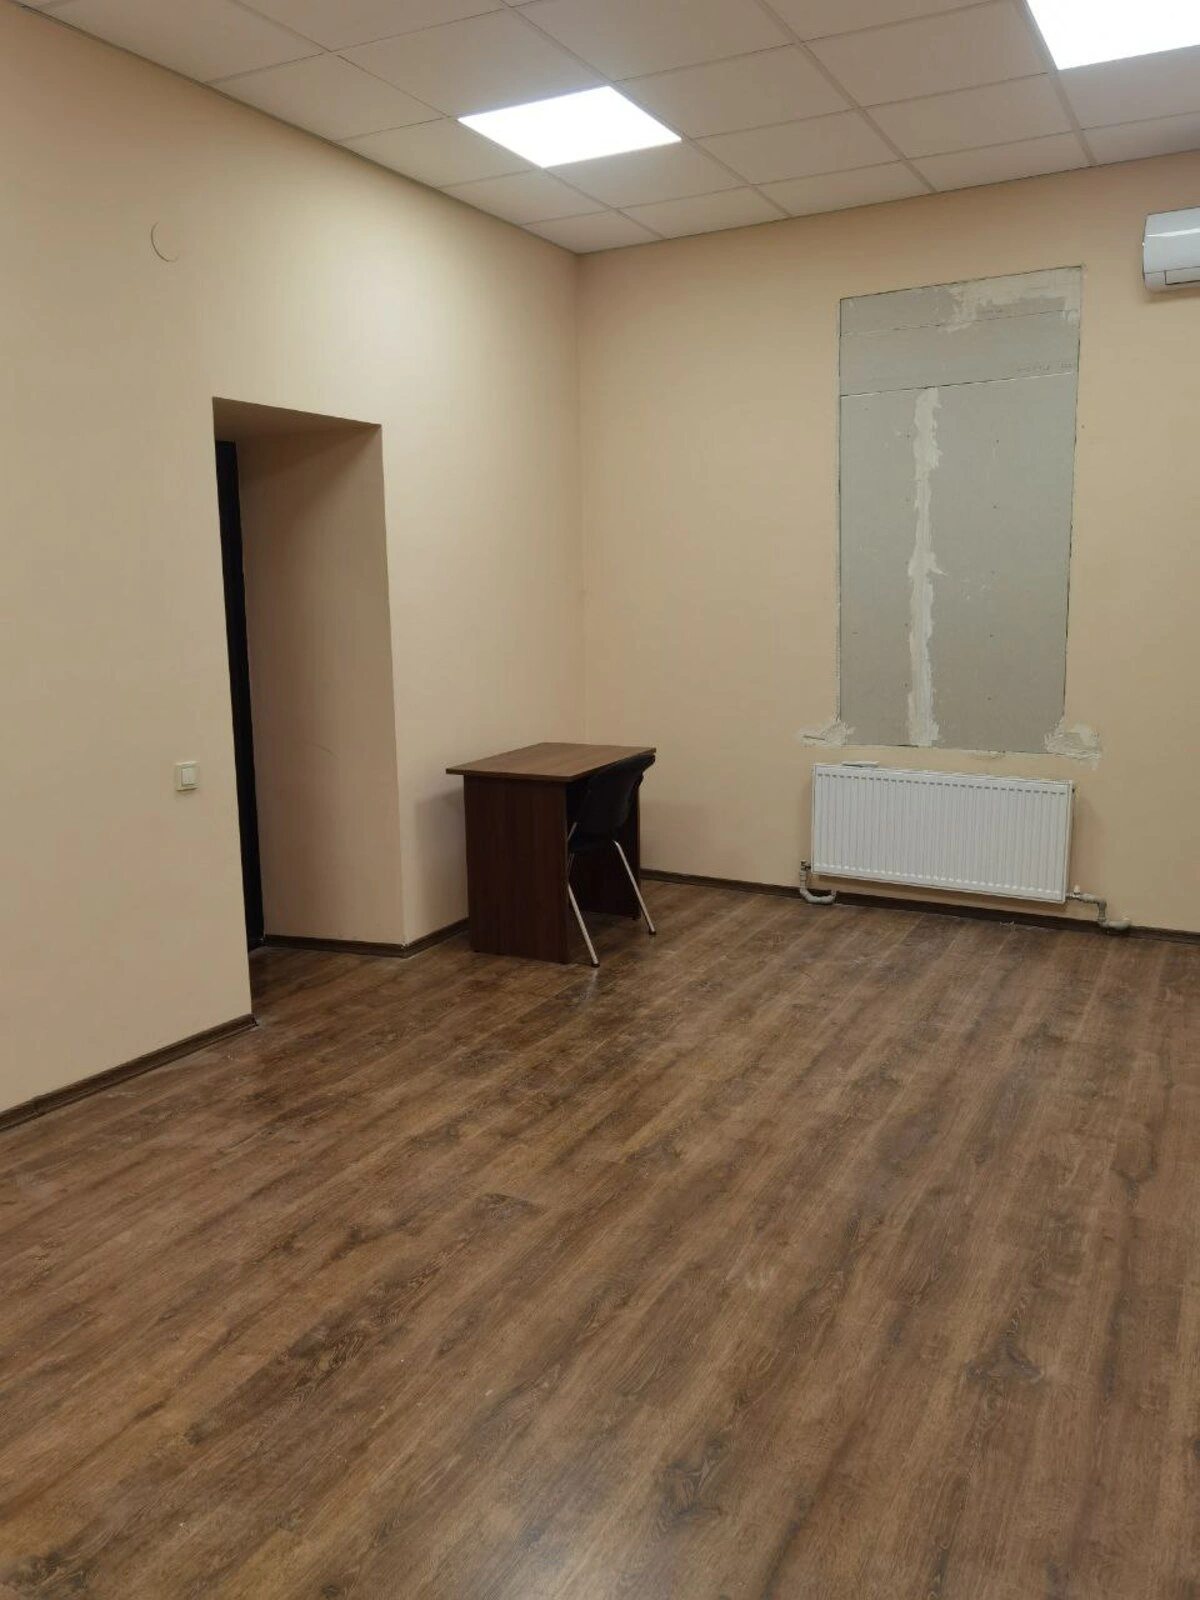 Real estate for sale for commercial purposes. 22 m², 2nd floor/2 floors. 42, Verhniy Val 42, Kyiv. 